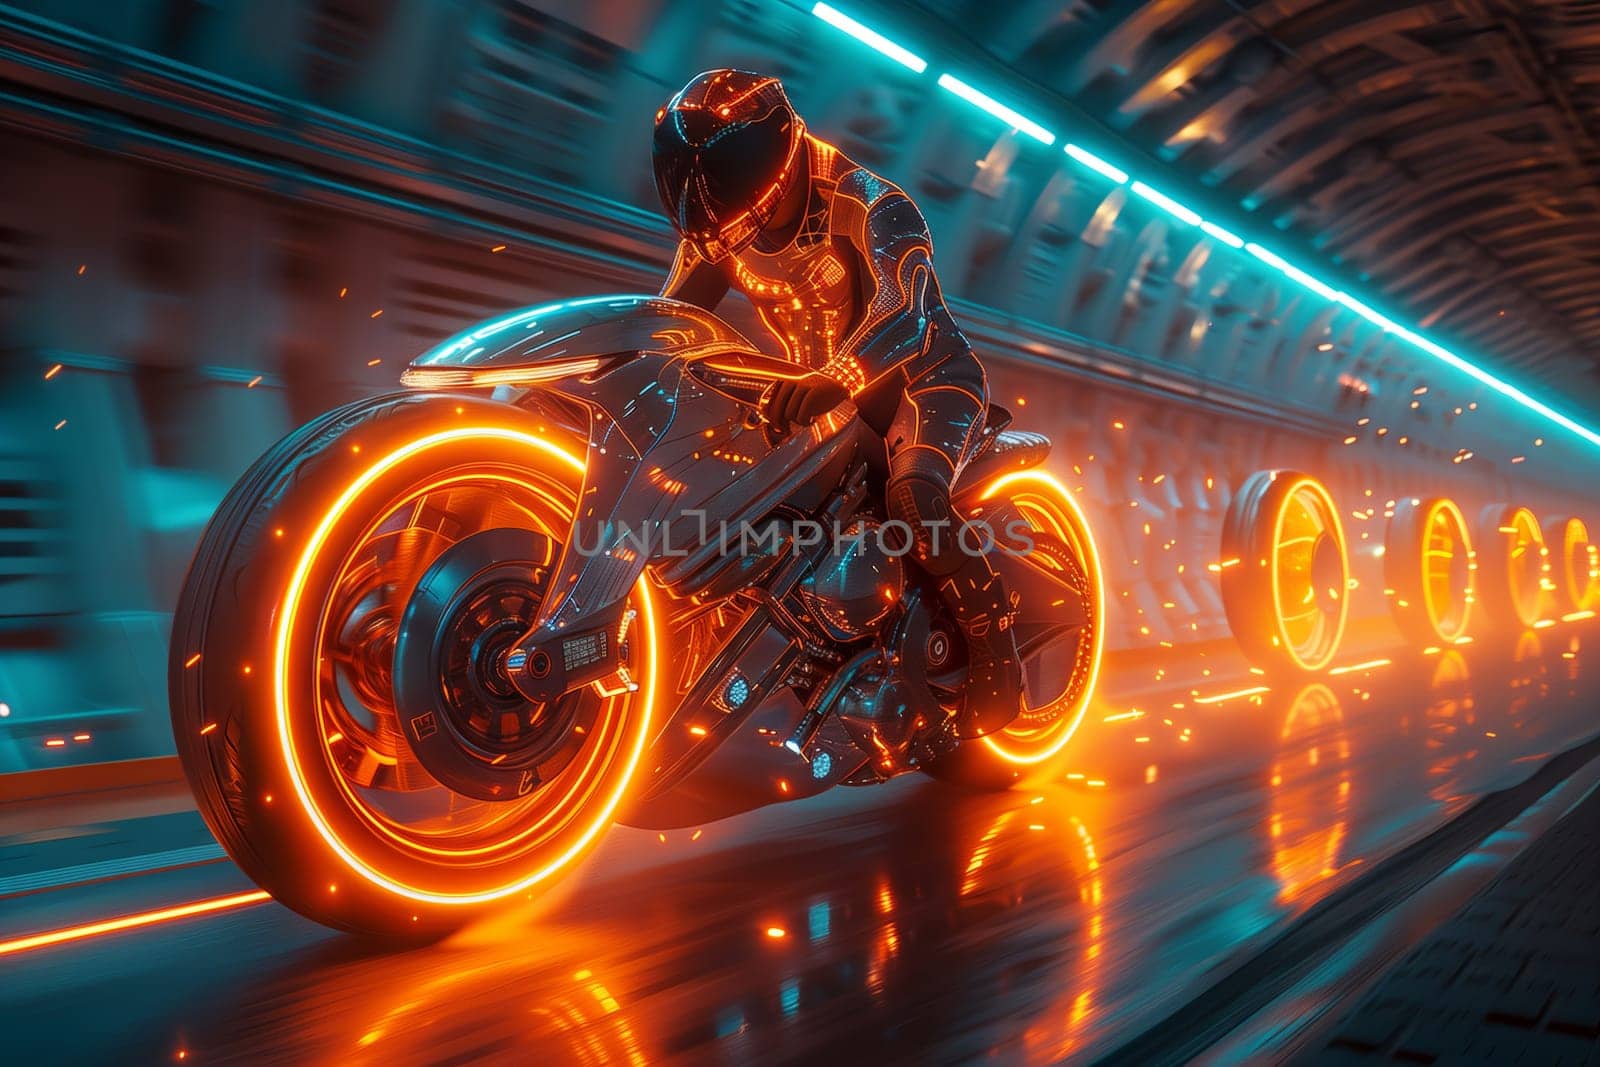 Person on neon motorcycle with electric blue automotive lighting in tunnel by richwolf